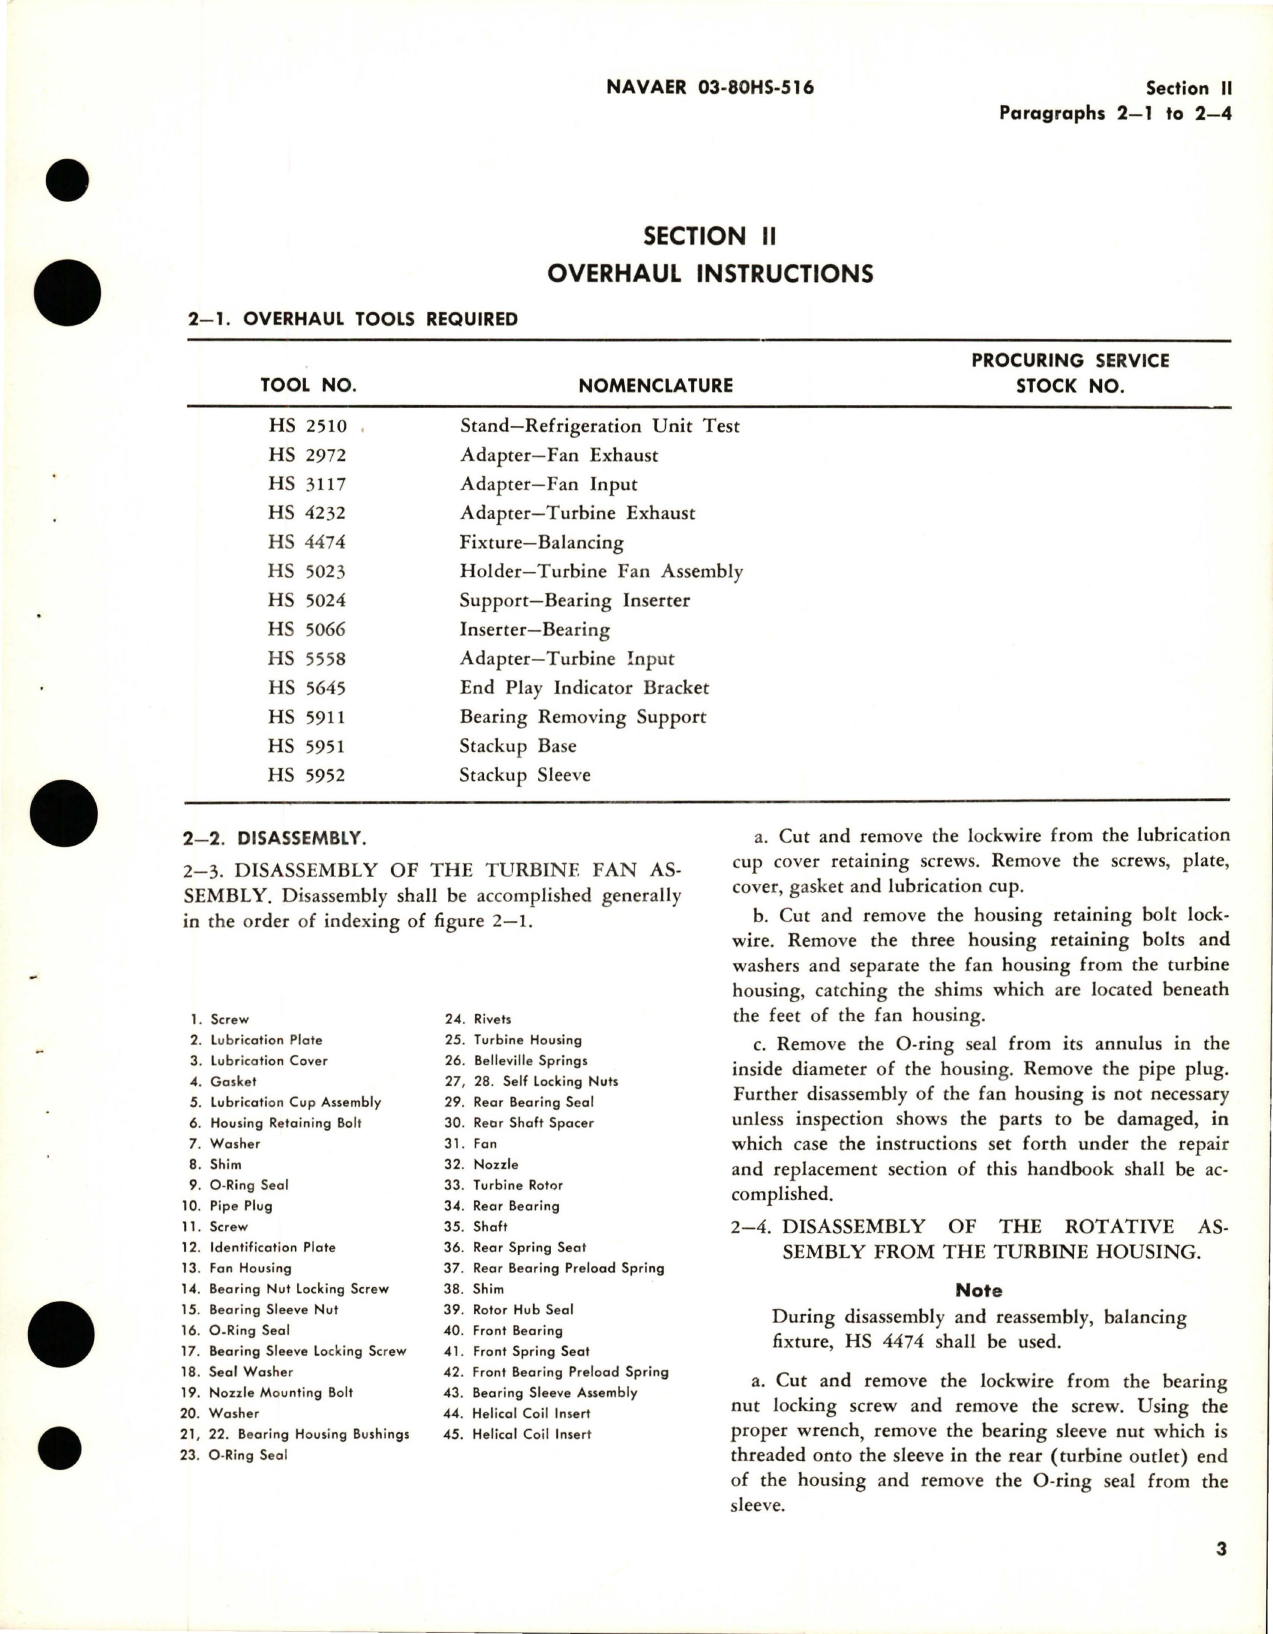 Sample page 7 from AirCorps Library document: Overhaul Instructions for Turbine Fan Assembly - 501073